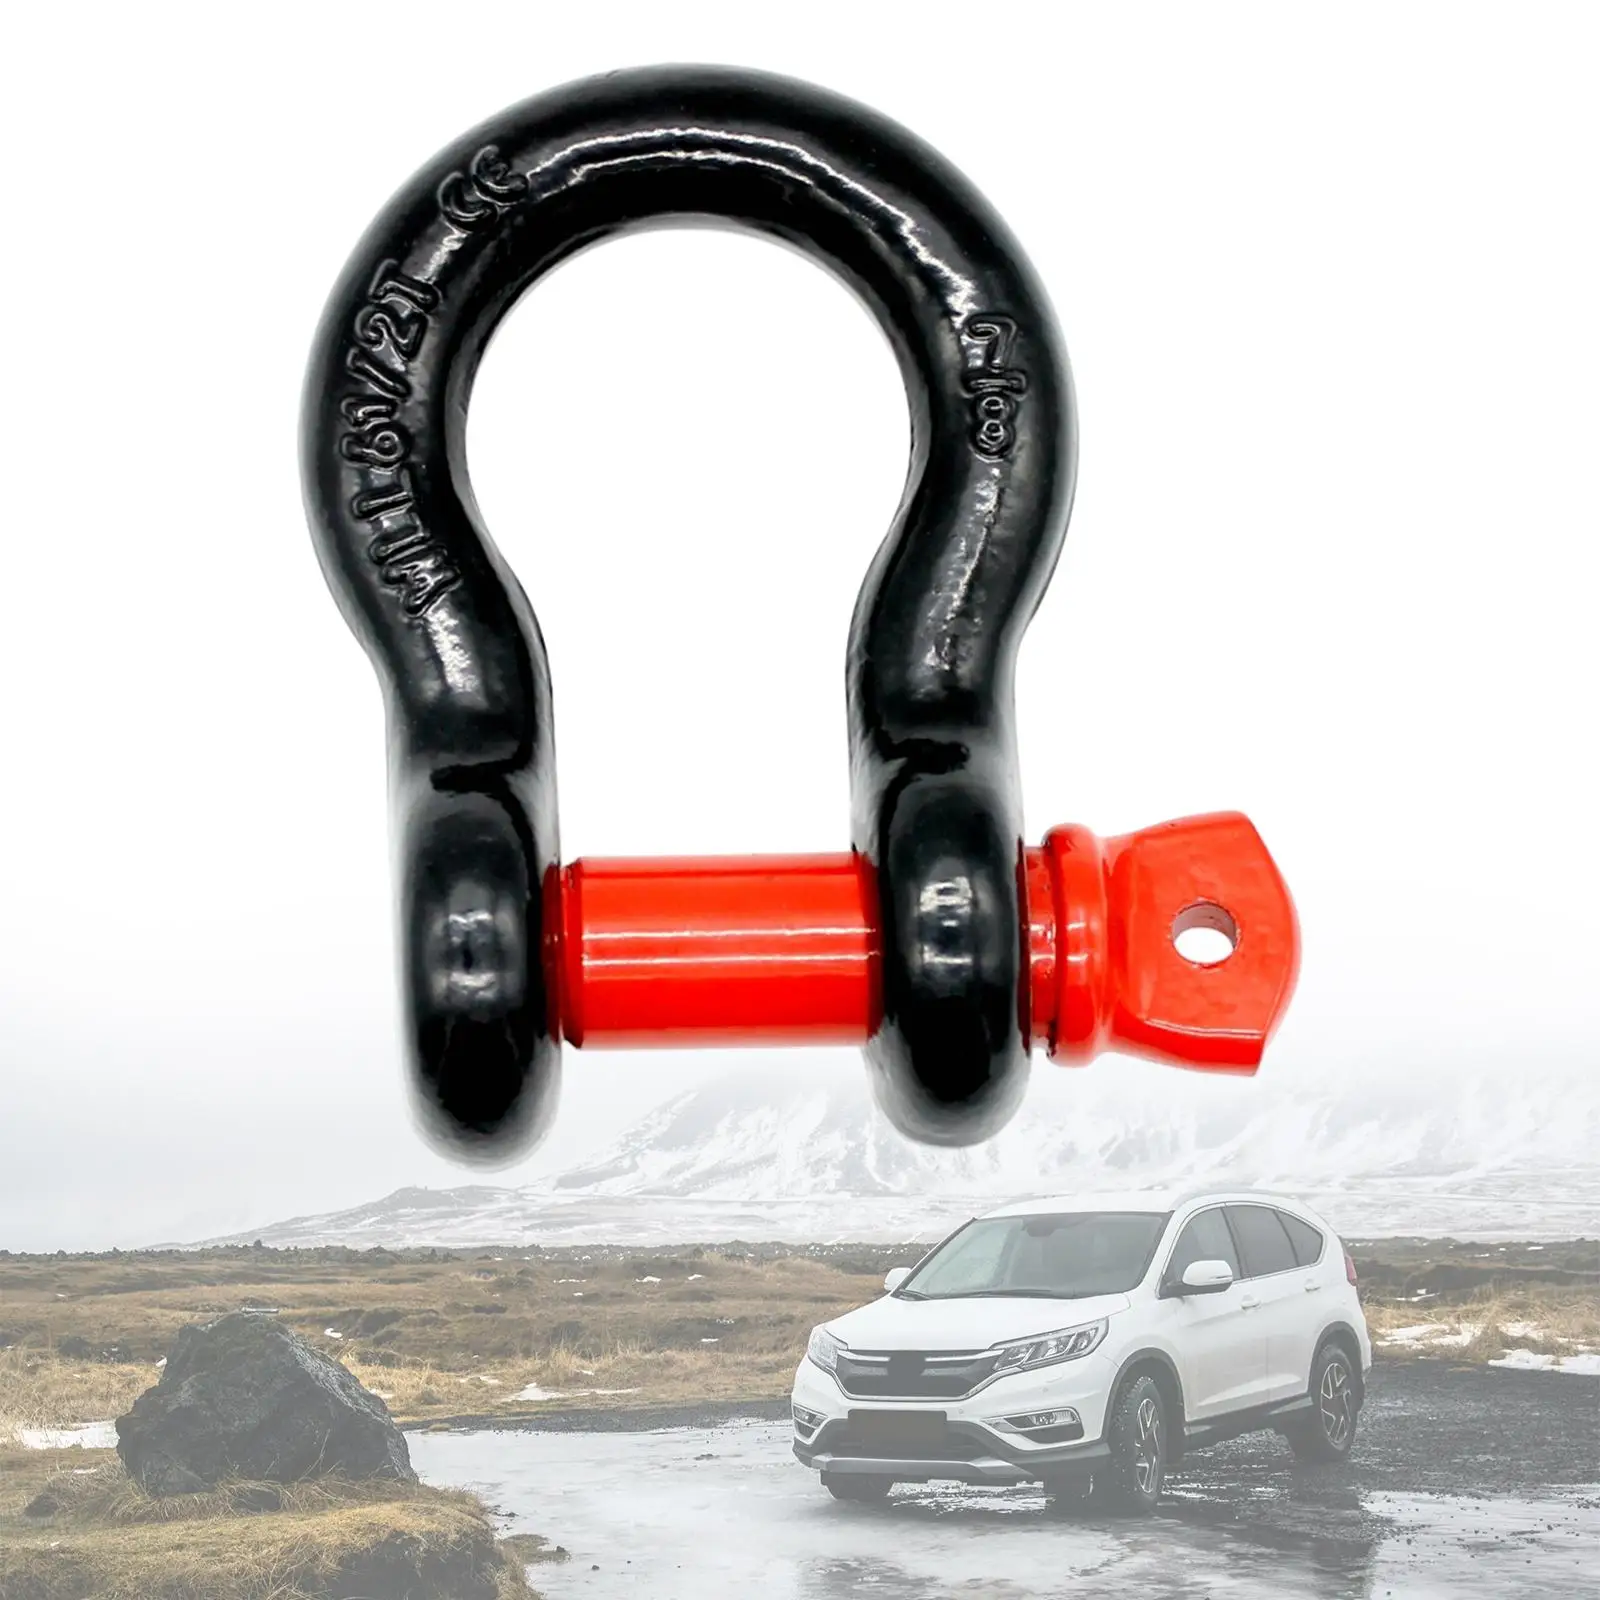 Car Tow Hook Ring 6.5T 23mm D Ring Shackle for Truck Car Trailer Hitch Vehicle Recovery Vehicle Repair Parts premium